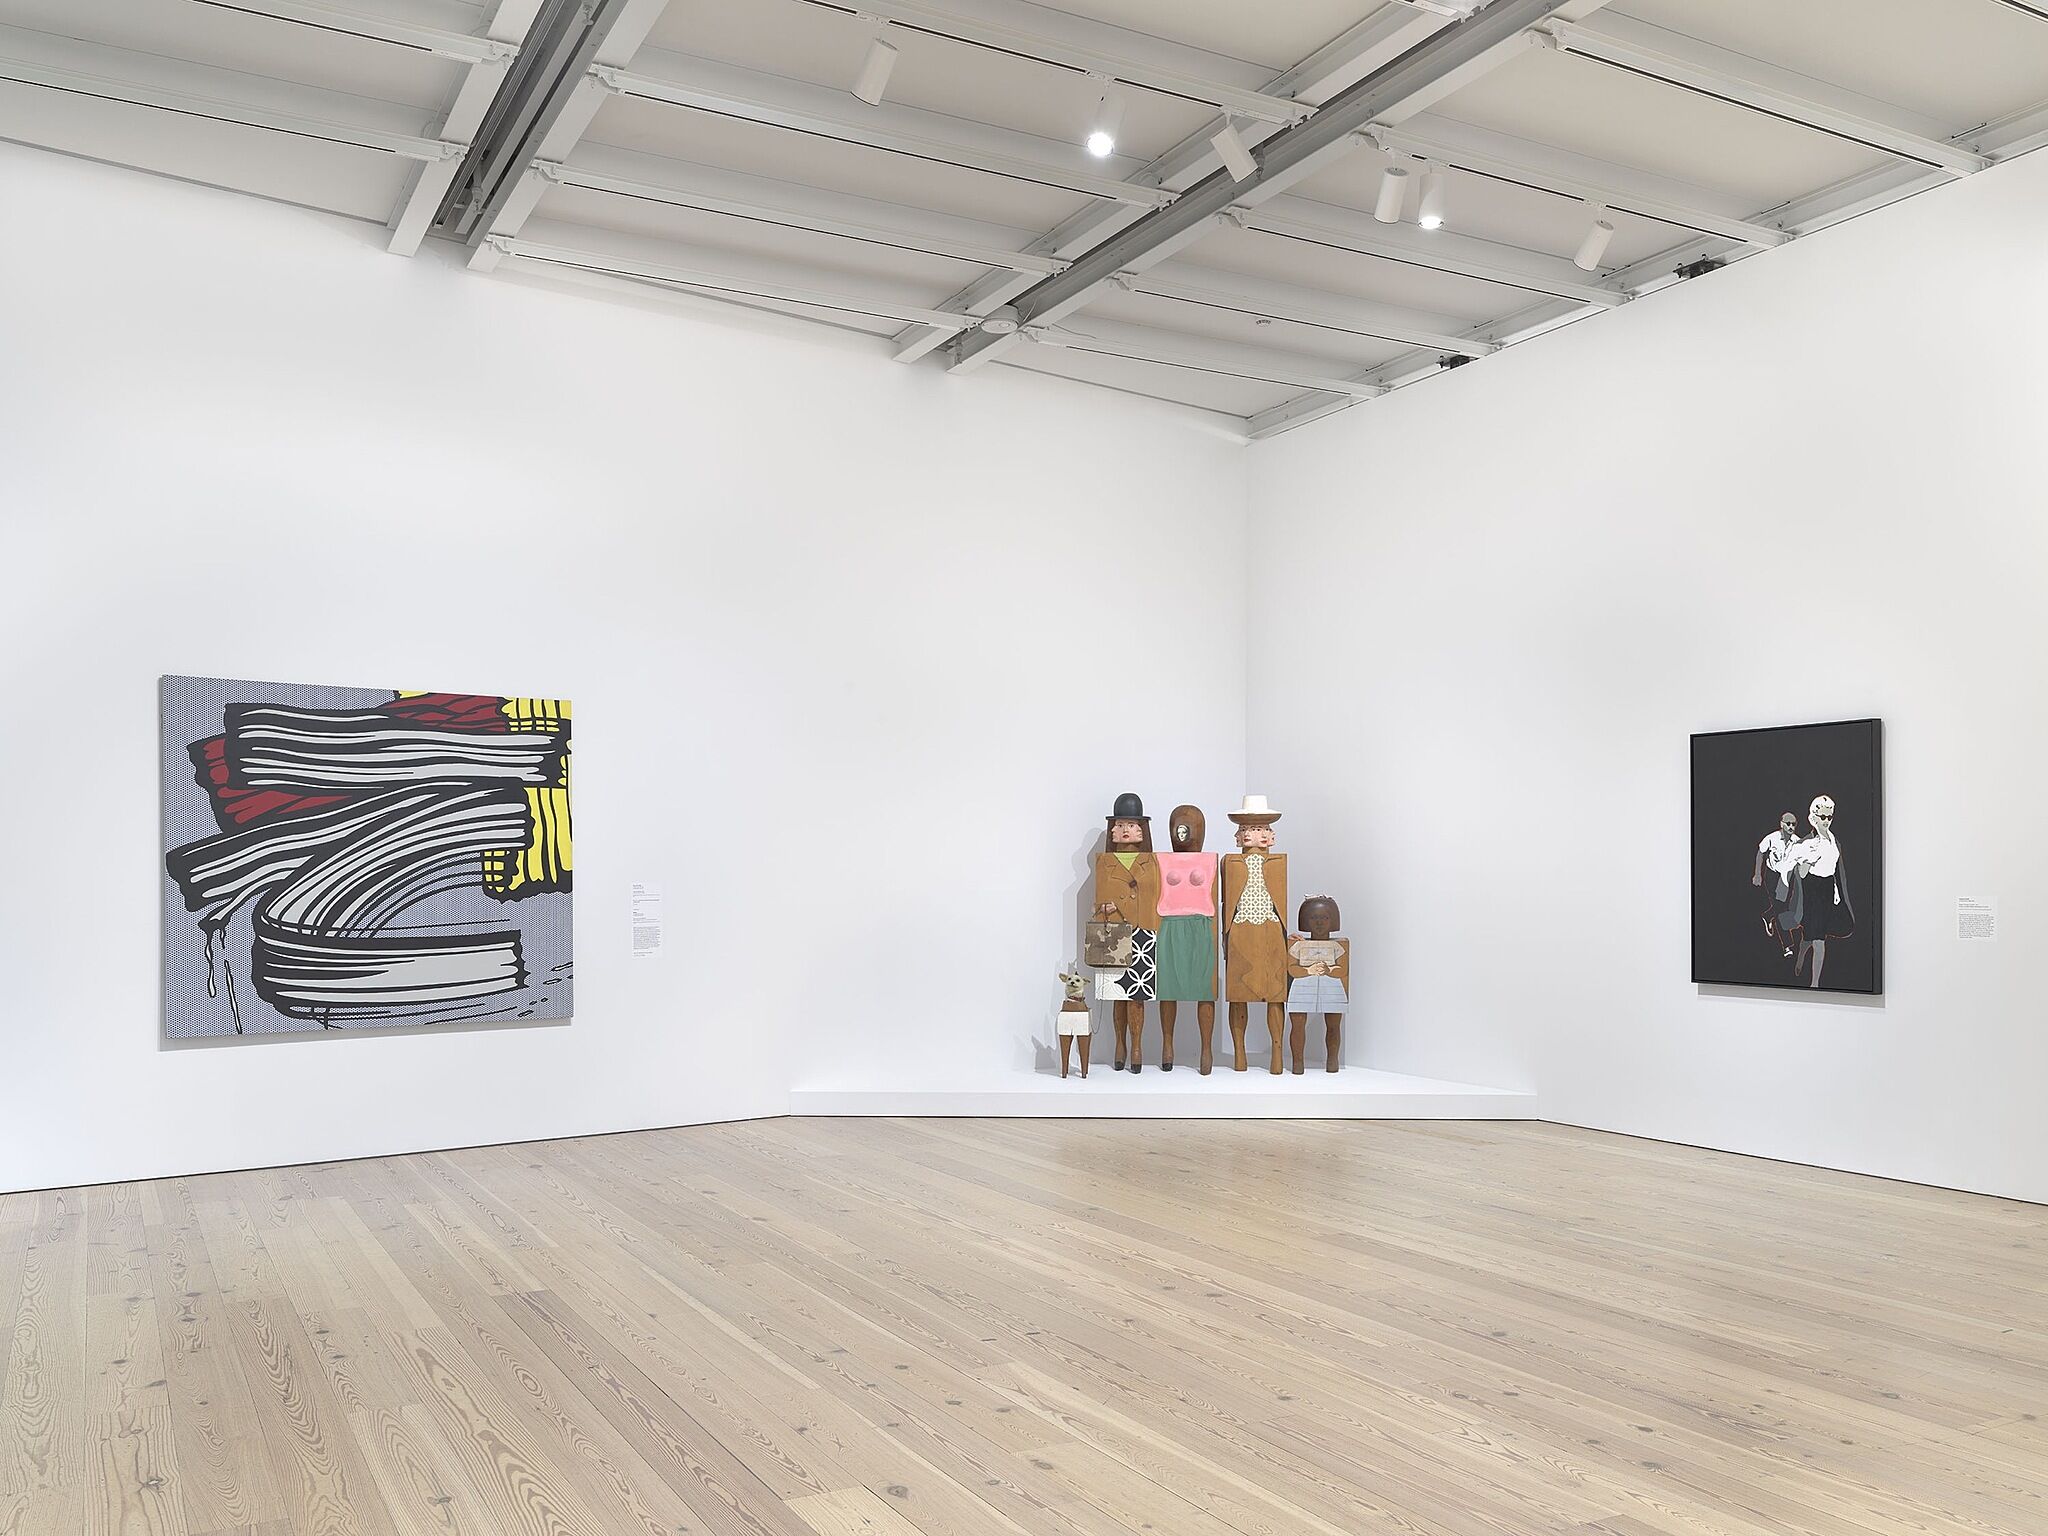 An image of the Whitney galleries with a standing sculpture and two wall artworks